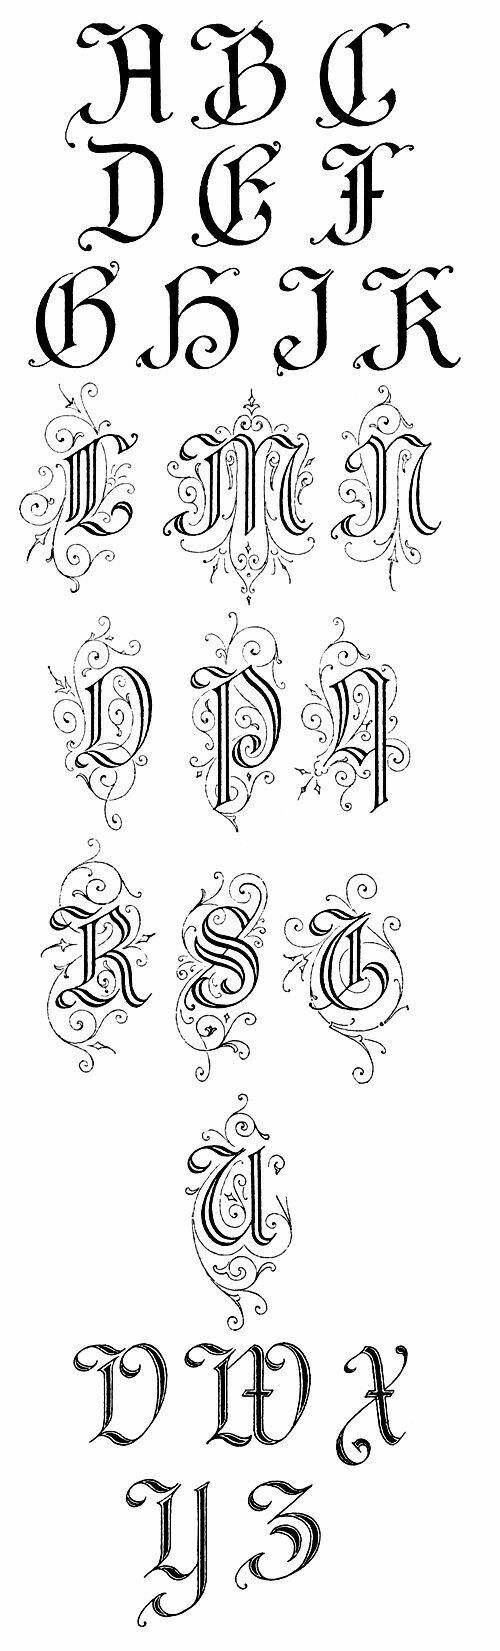 Gothic modified capital letters with coils and spirals